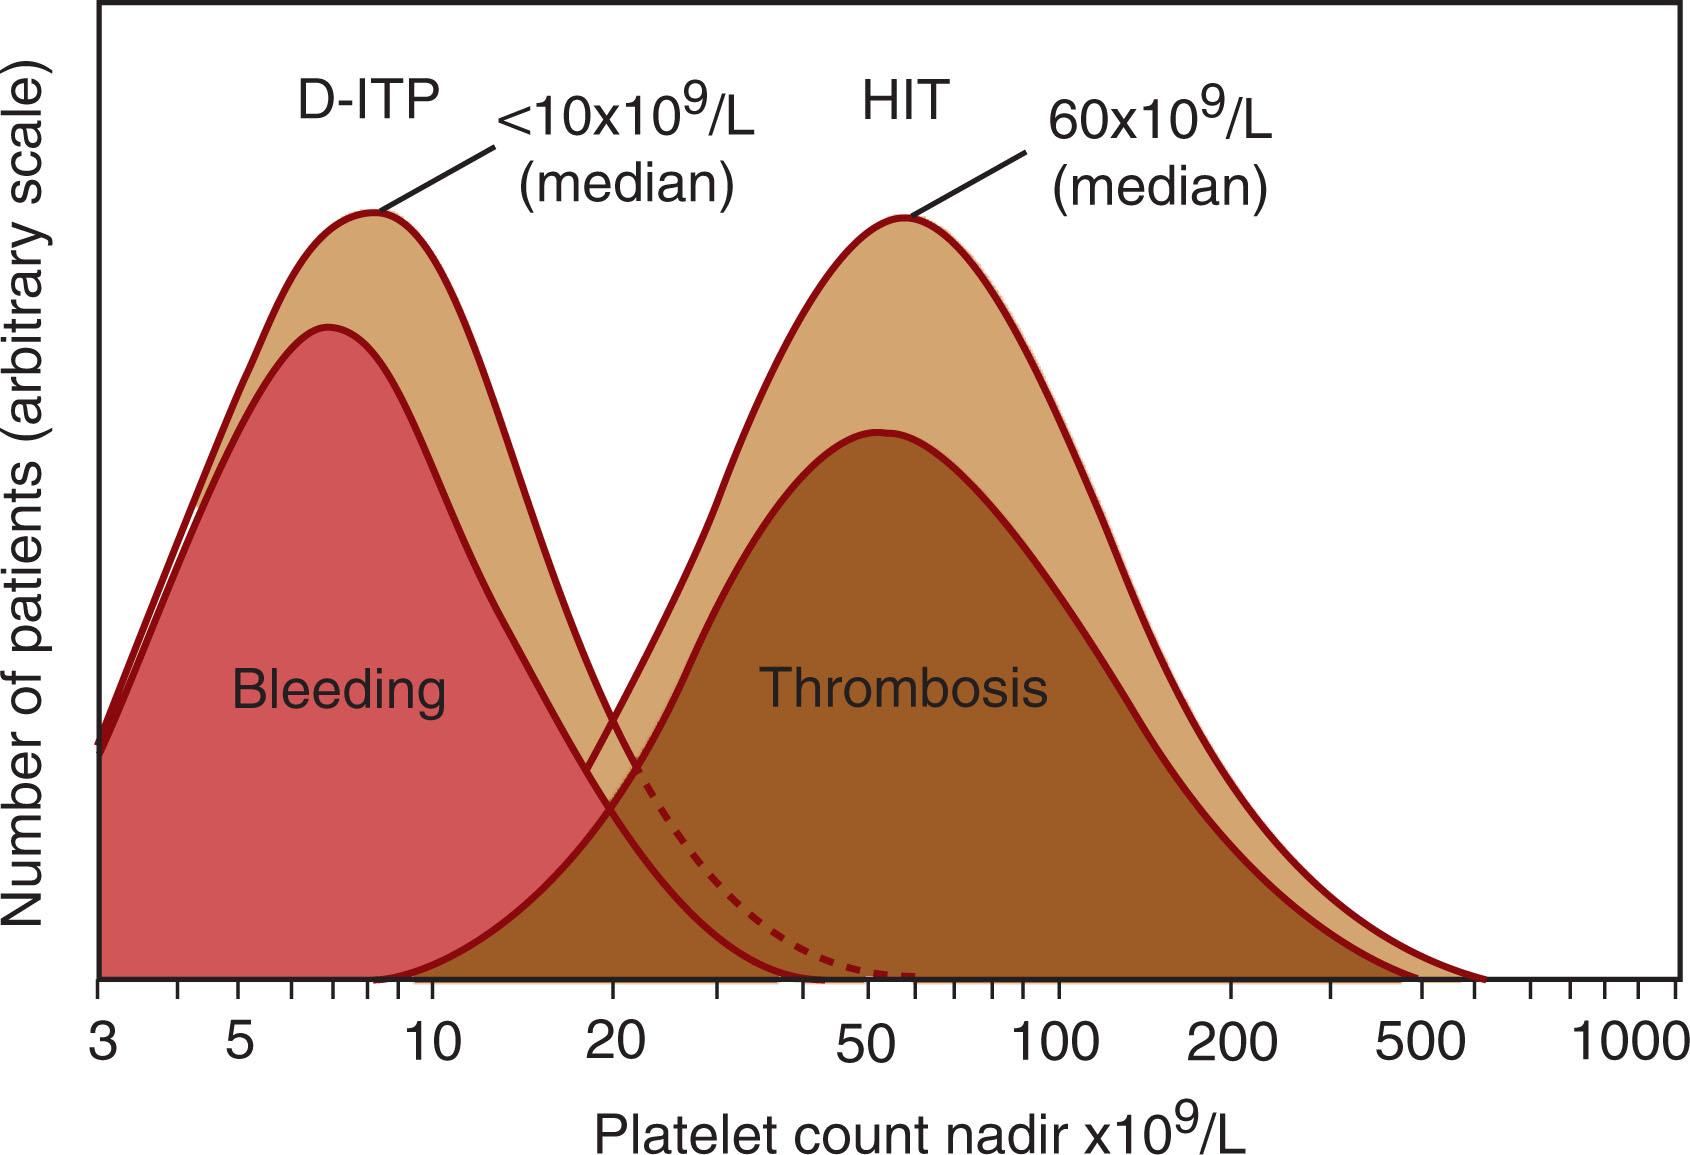 Figure 131.3, SEVERITY OF THROMBOCYTOPENIA IN DRUG-INDUCED IMMUNE THROMBOCYTOPENIA: A COMPARISON OF HEPARIN-INDUCED THROMBOCYTOPENIA VERSUS OTHER DRUG-INDUCED IMMUNE THROMBOCYTOPENIA DISORDERS.